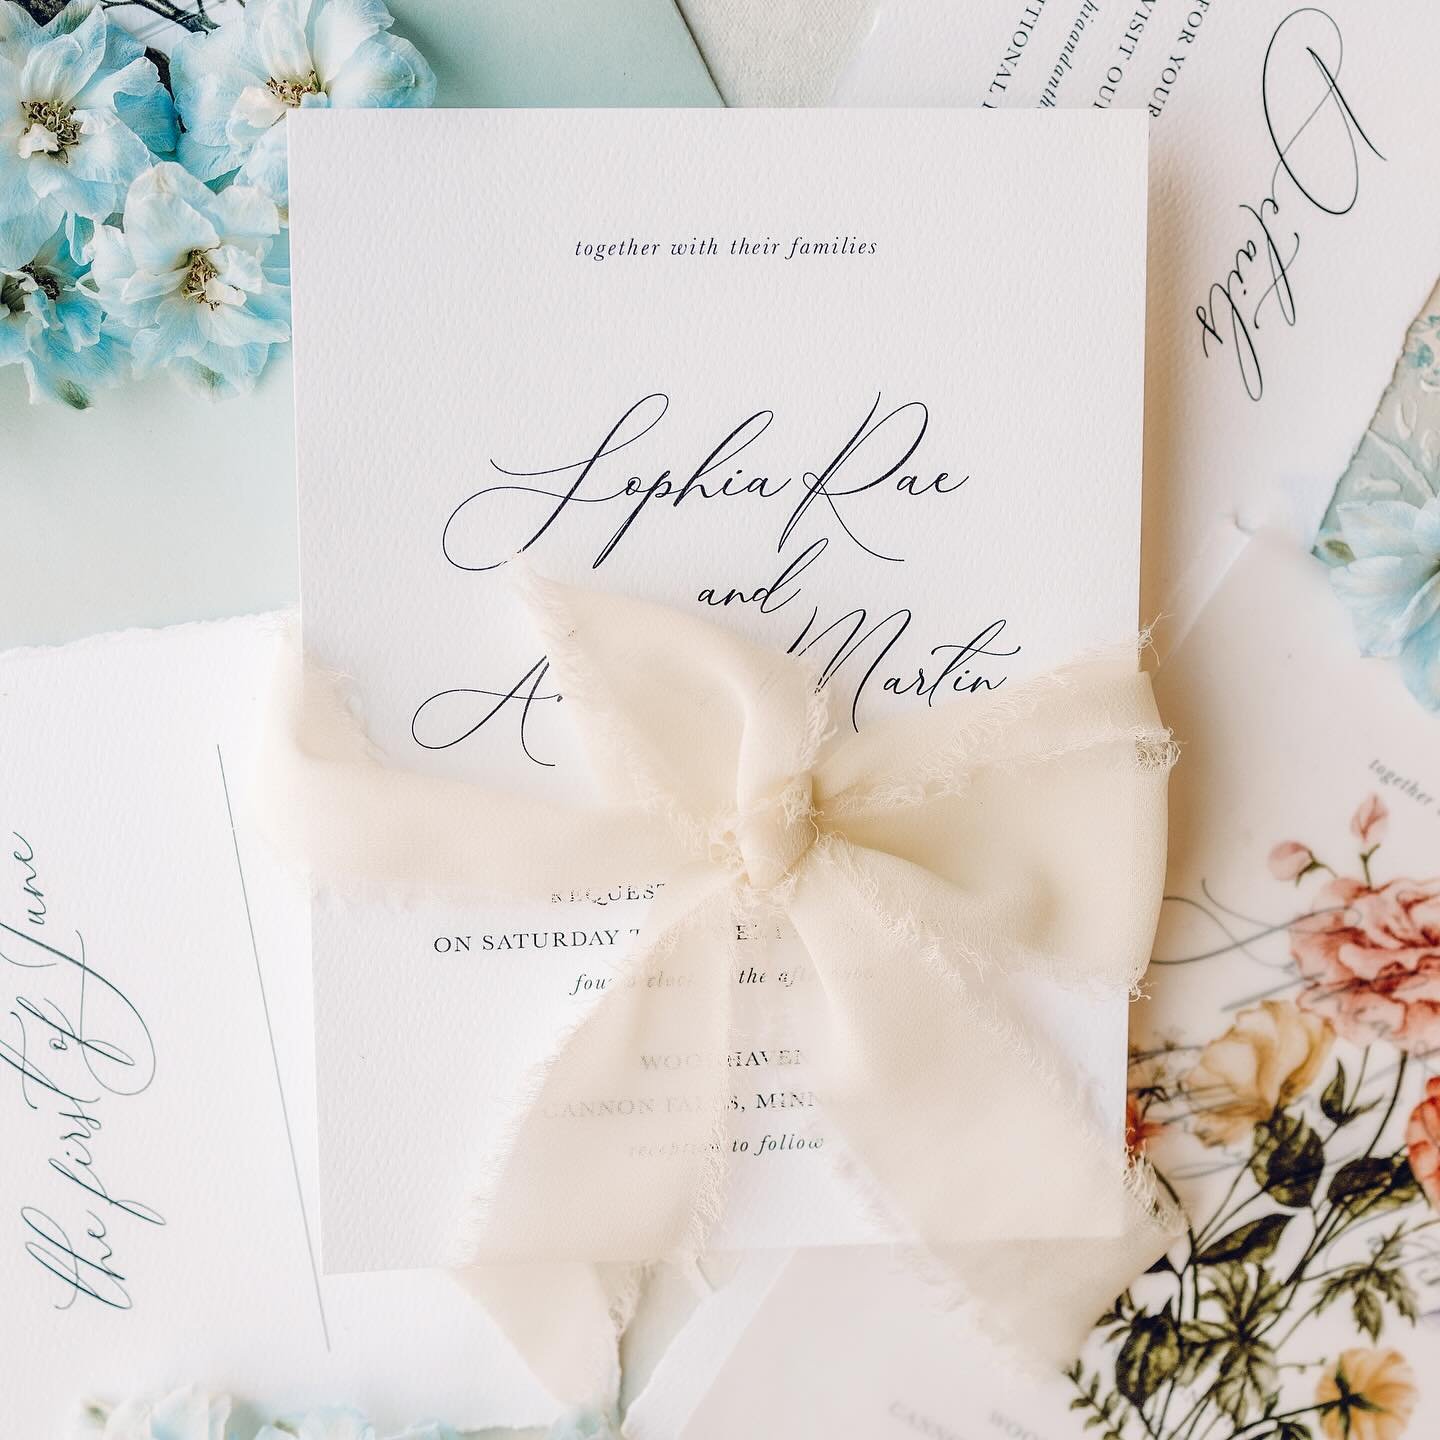 It was an absolute honour to be apart of this collaborated spring style shoot hosted by @melroseeventsco @jenniferkamenphoto and
@abundantgracephotographymn 

It&rsquo;s not everyday I get to showcase my art on wedding invitations, but when it do, it